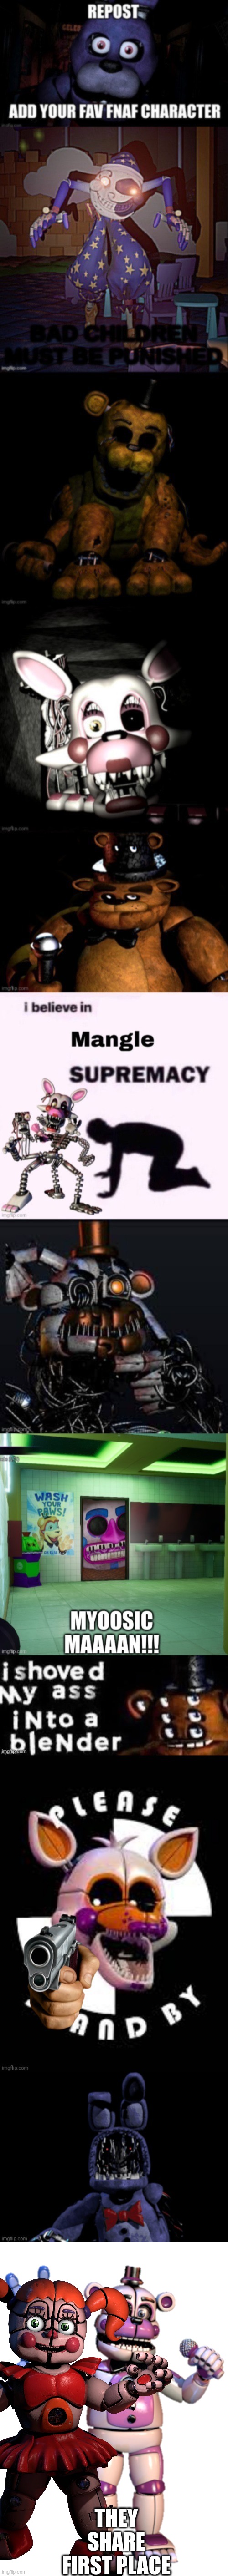 It is actually sad | THEY SHARE FIRST PLACE | image tagged in fnaf | made w/ Imgflip meme maker